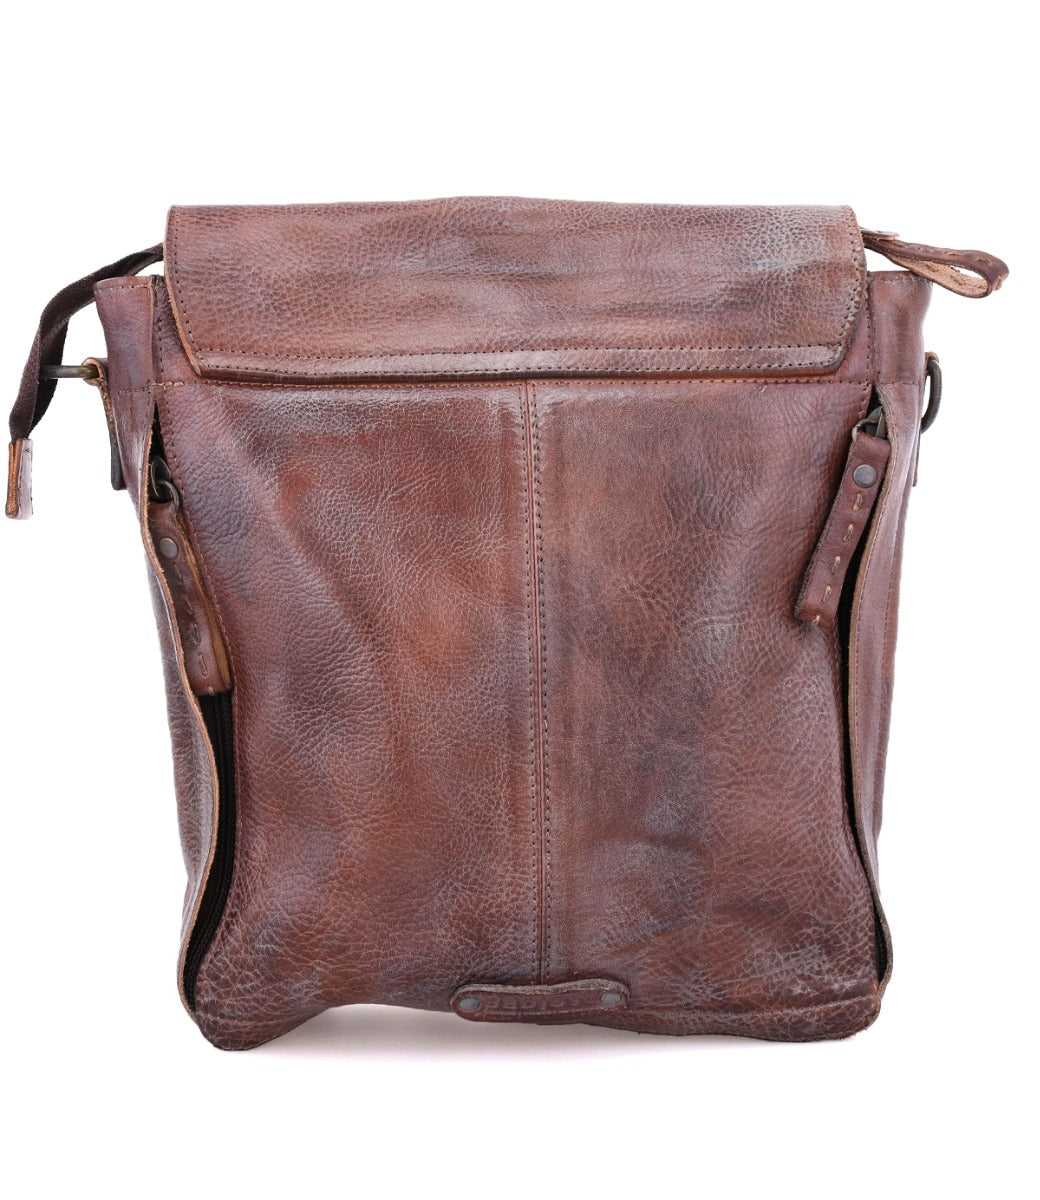 Brown leather crossbody handbag with a frontal flap, visible wear, and an adjustable strap, isolated on a white background by Bed Stu's Ainhoa LTC.